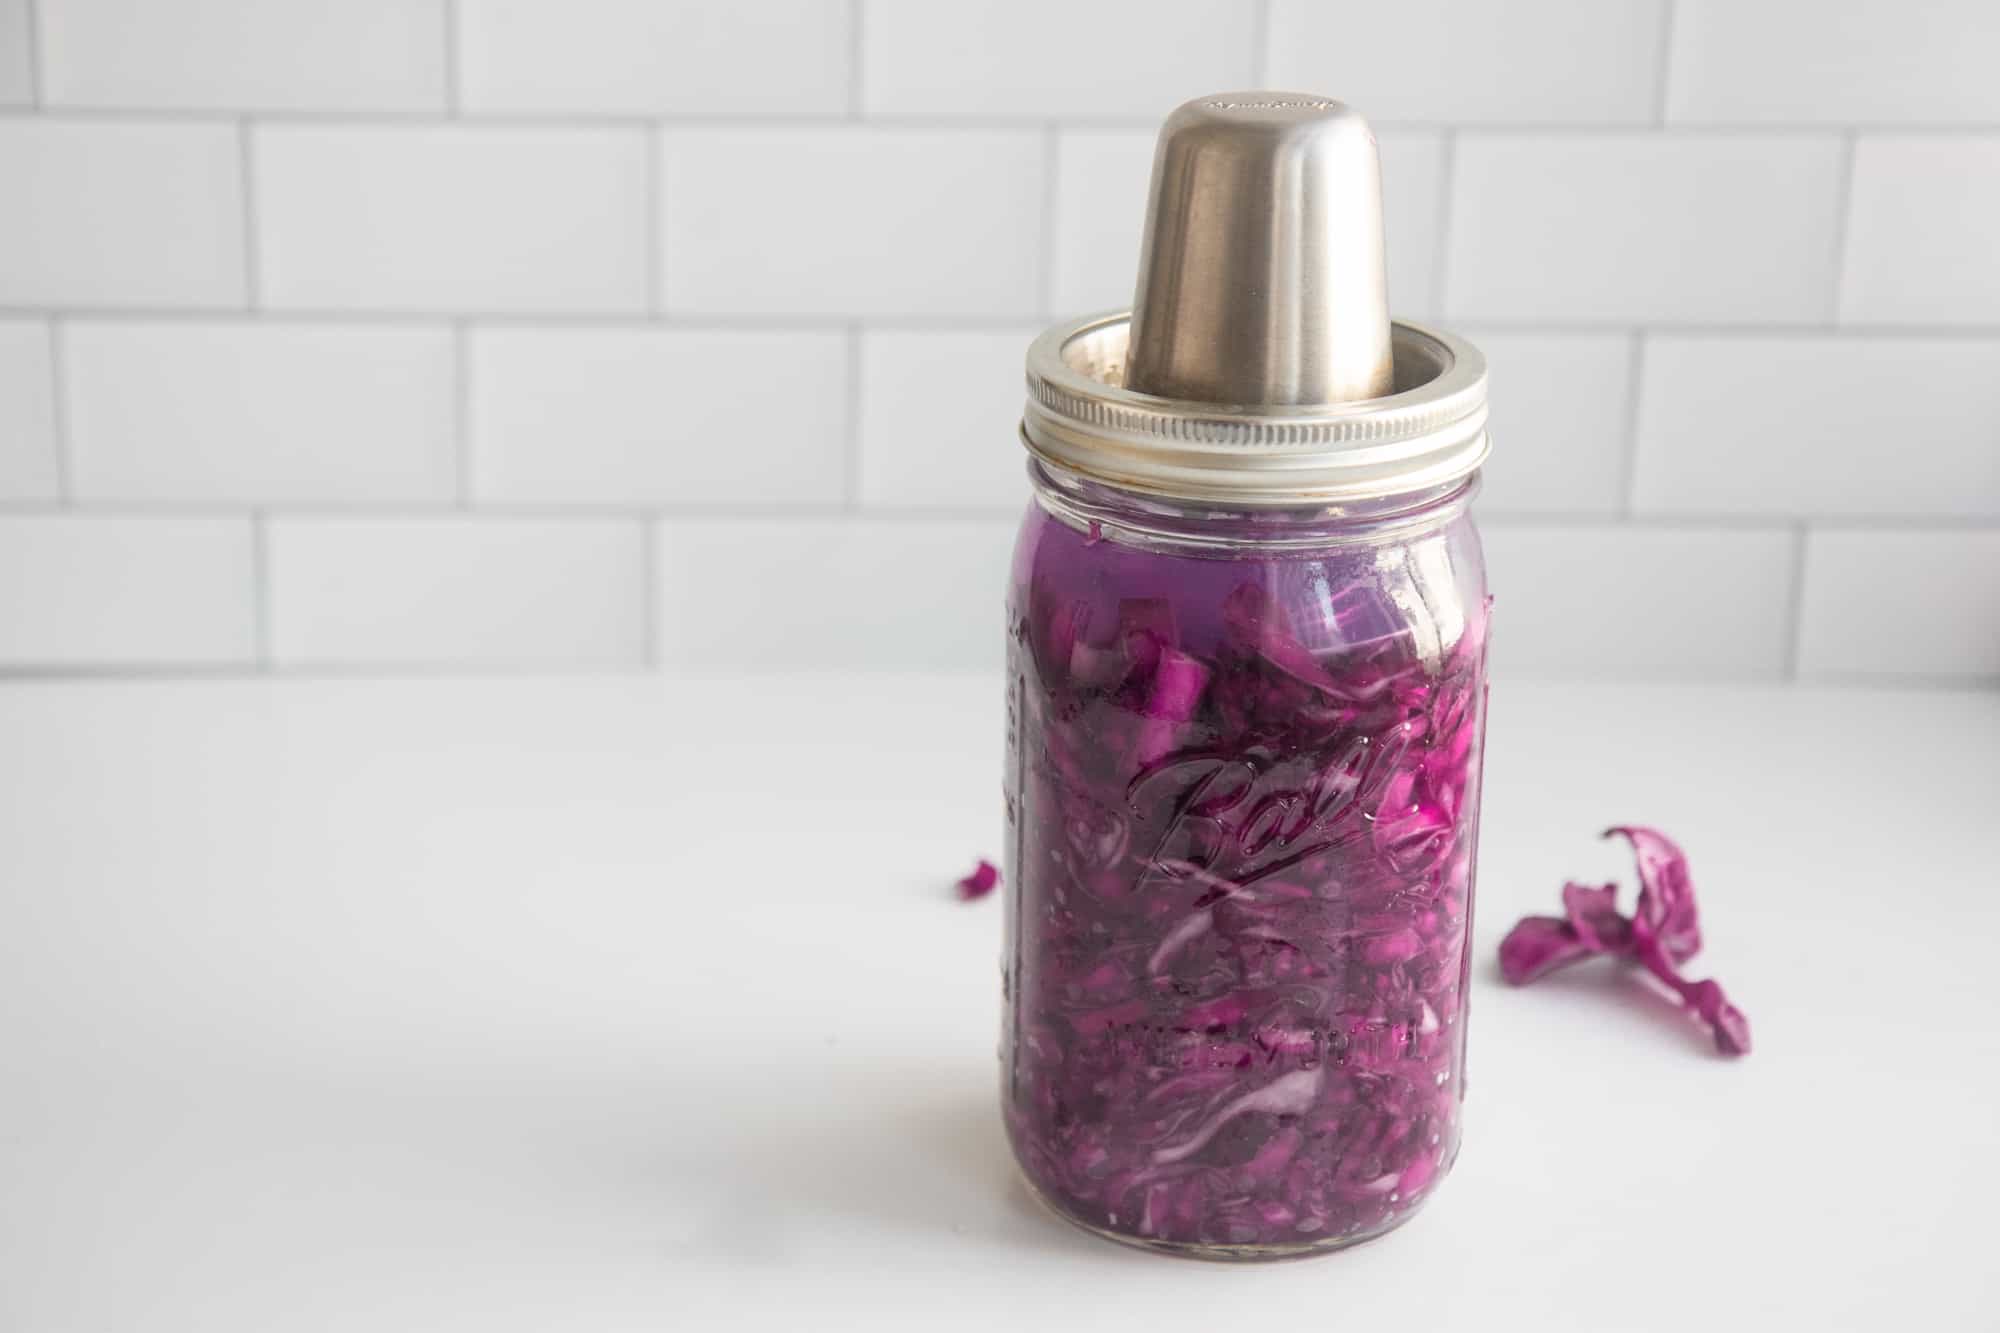 Homemade sauerkraut sits on a counter in a glass jar with a fermentation lid. Red cabbage slices are on the counter behind the jar.